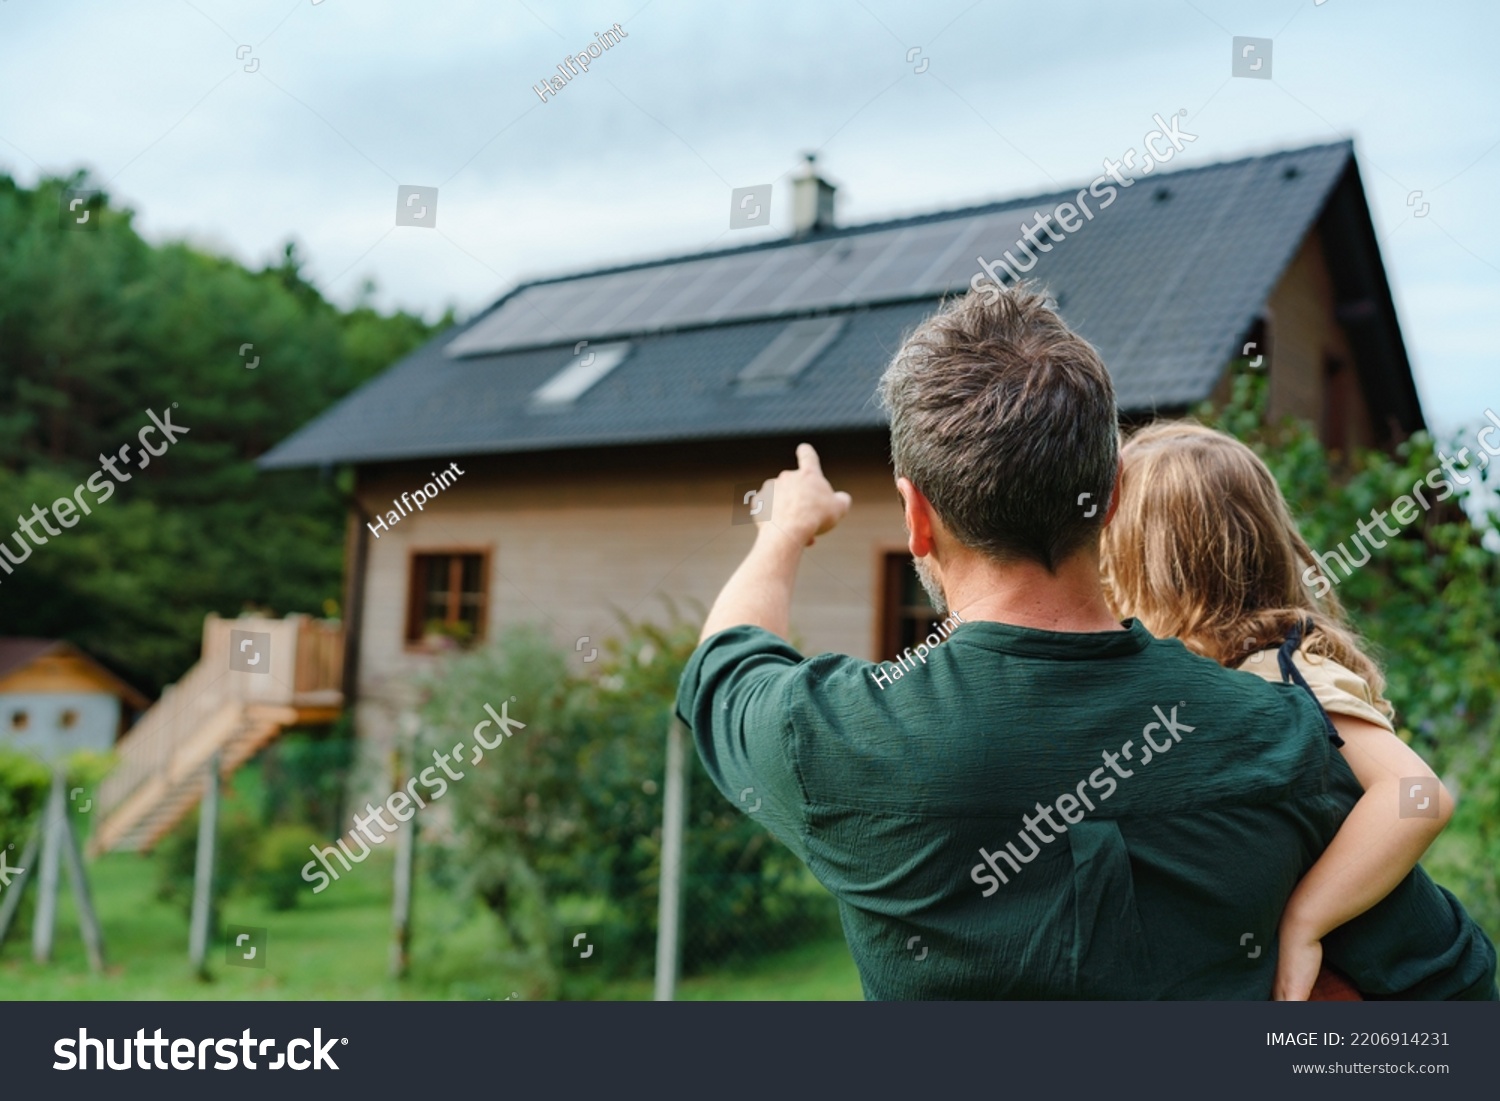 Rear view of dad holding her little girl in arms and showing at their house with installed solar panels. Alternative energy, saving resources and sustainable lifestyle concept. #2206914231